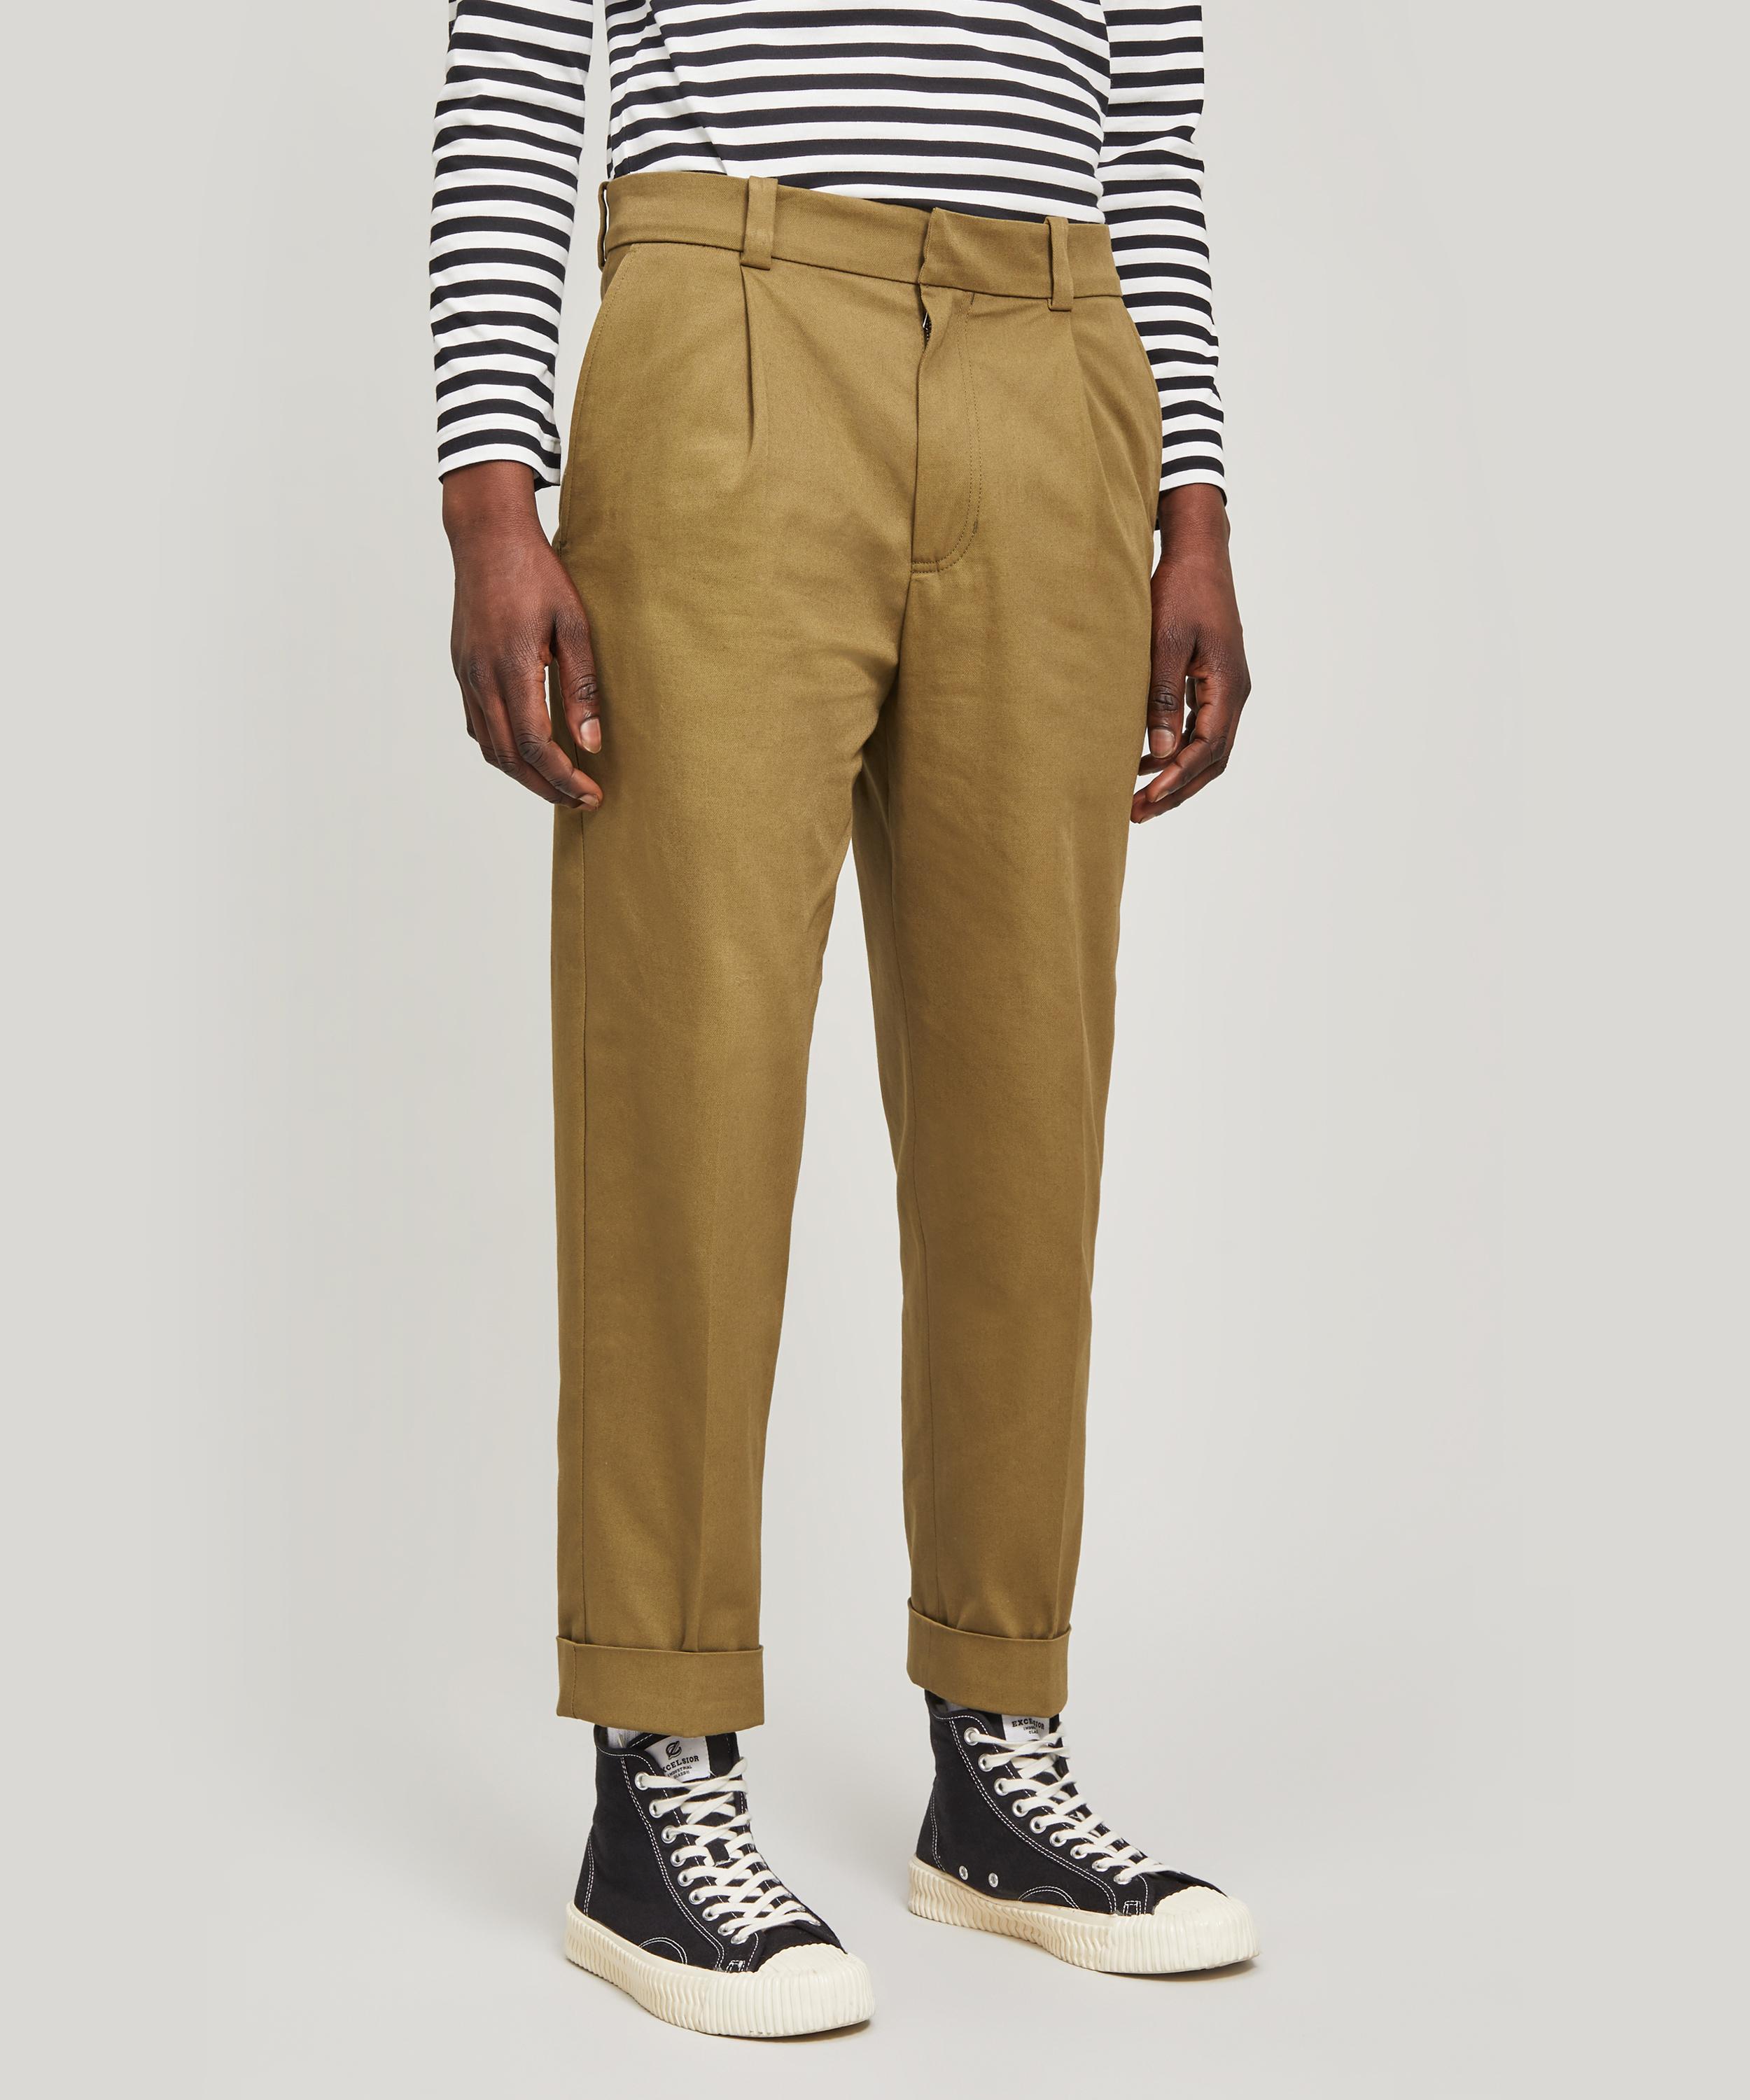 ACNE STUDIOS PIERRE STRUCTURED CROPPED TROUSERS,000643013